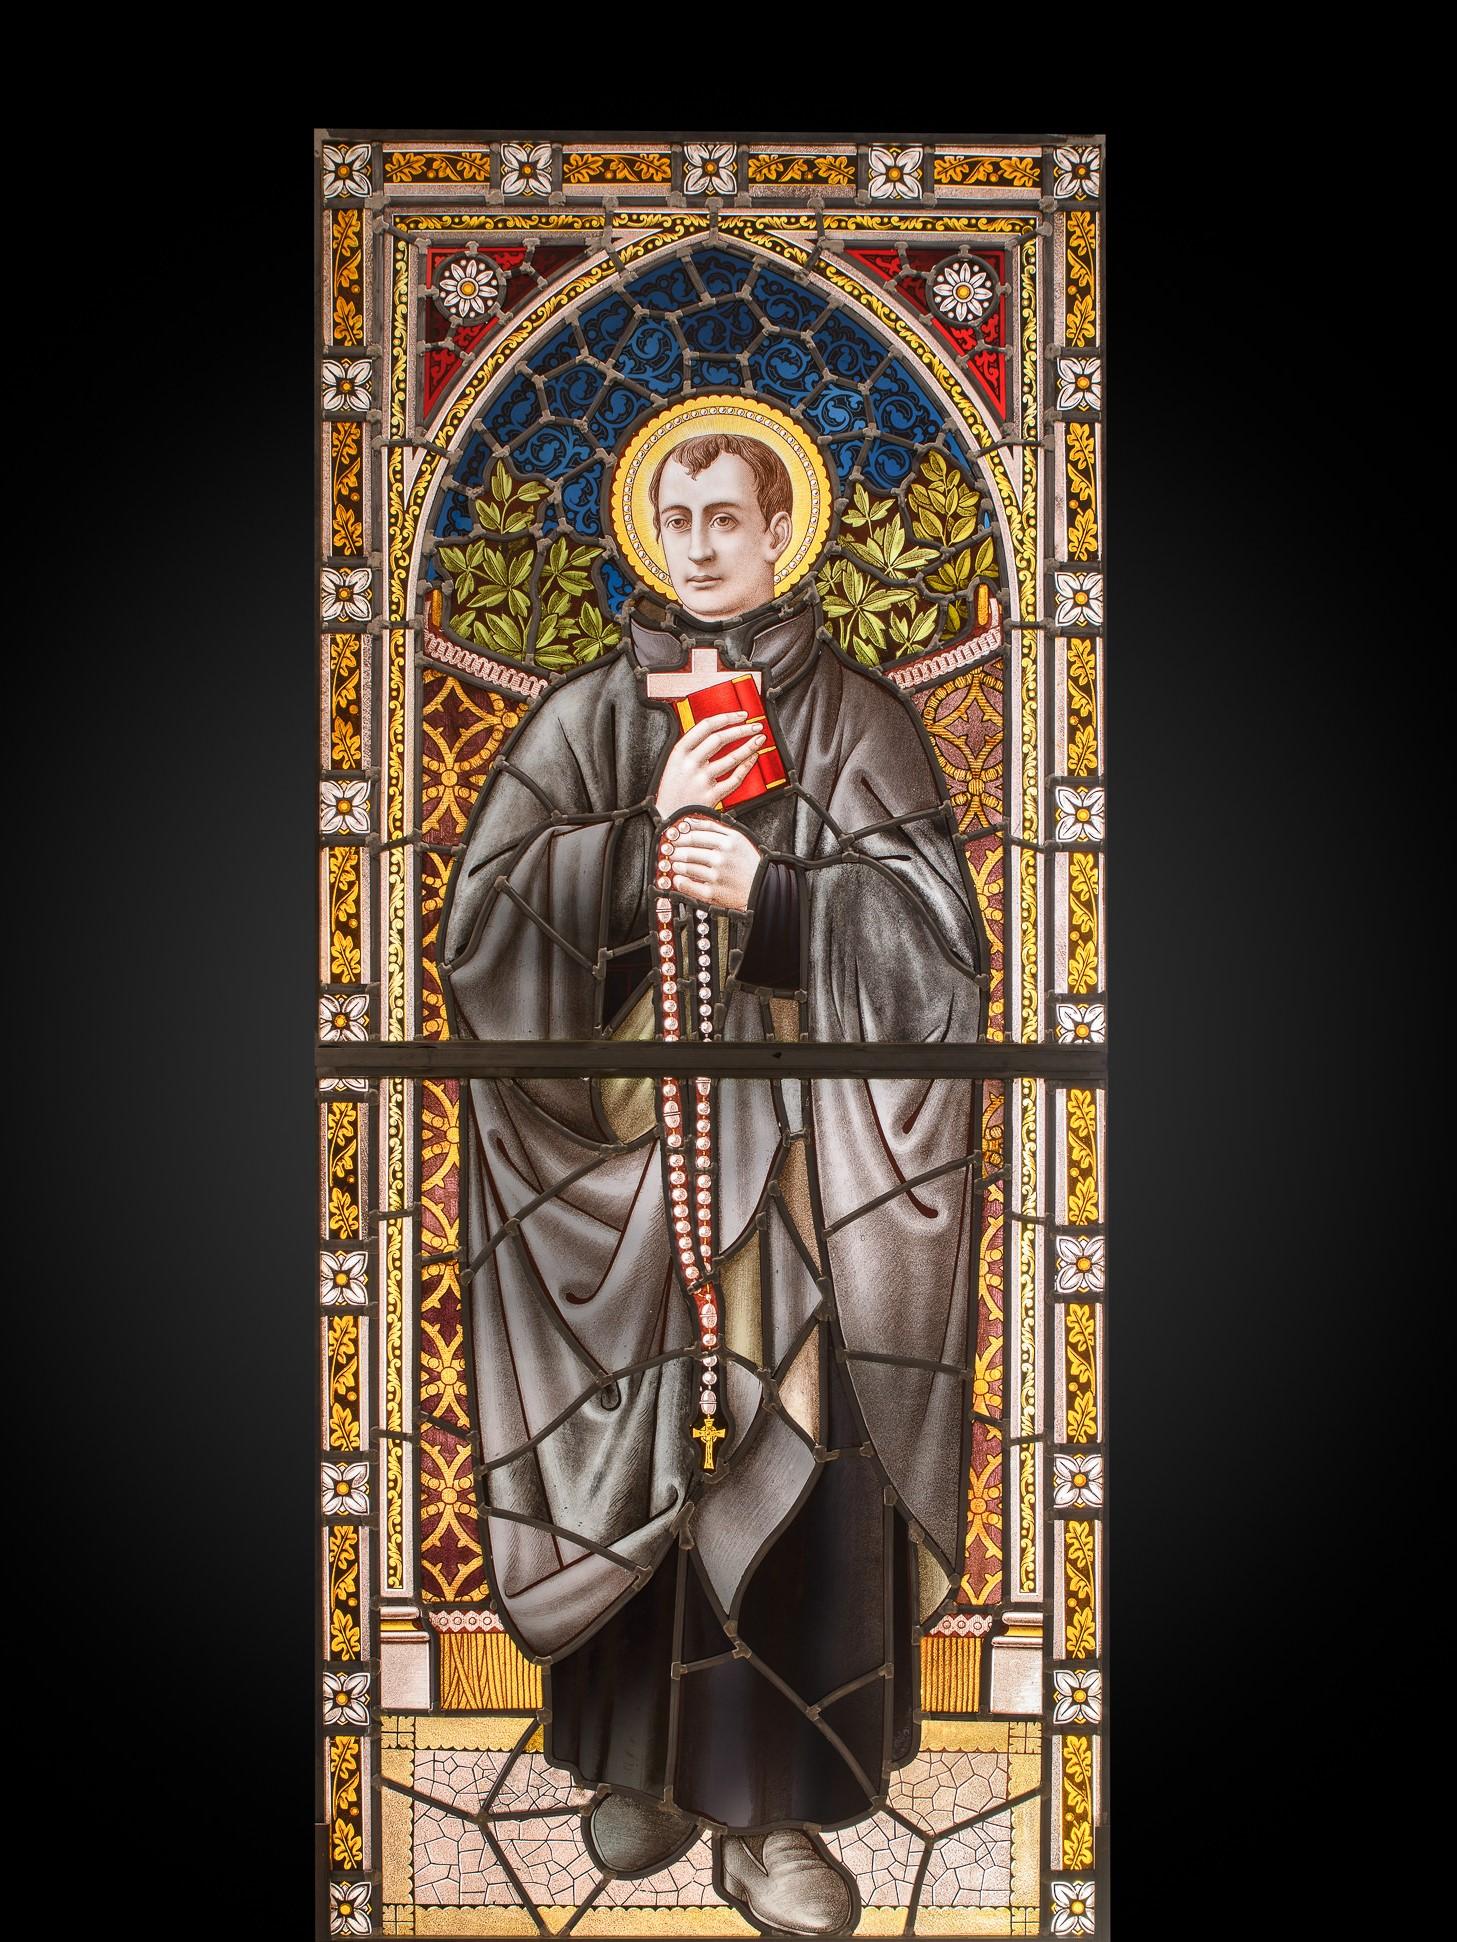 Unknown Figurative Painting - Neo-Gothic Stained Glass Window with St. John Berchmans.